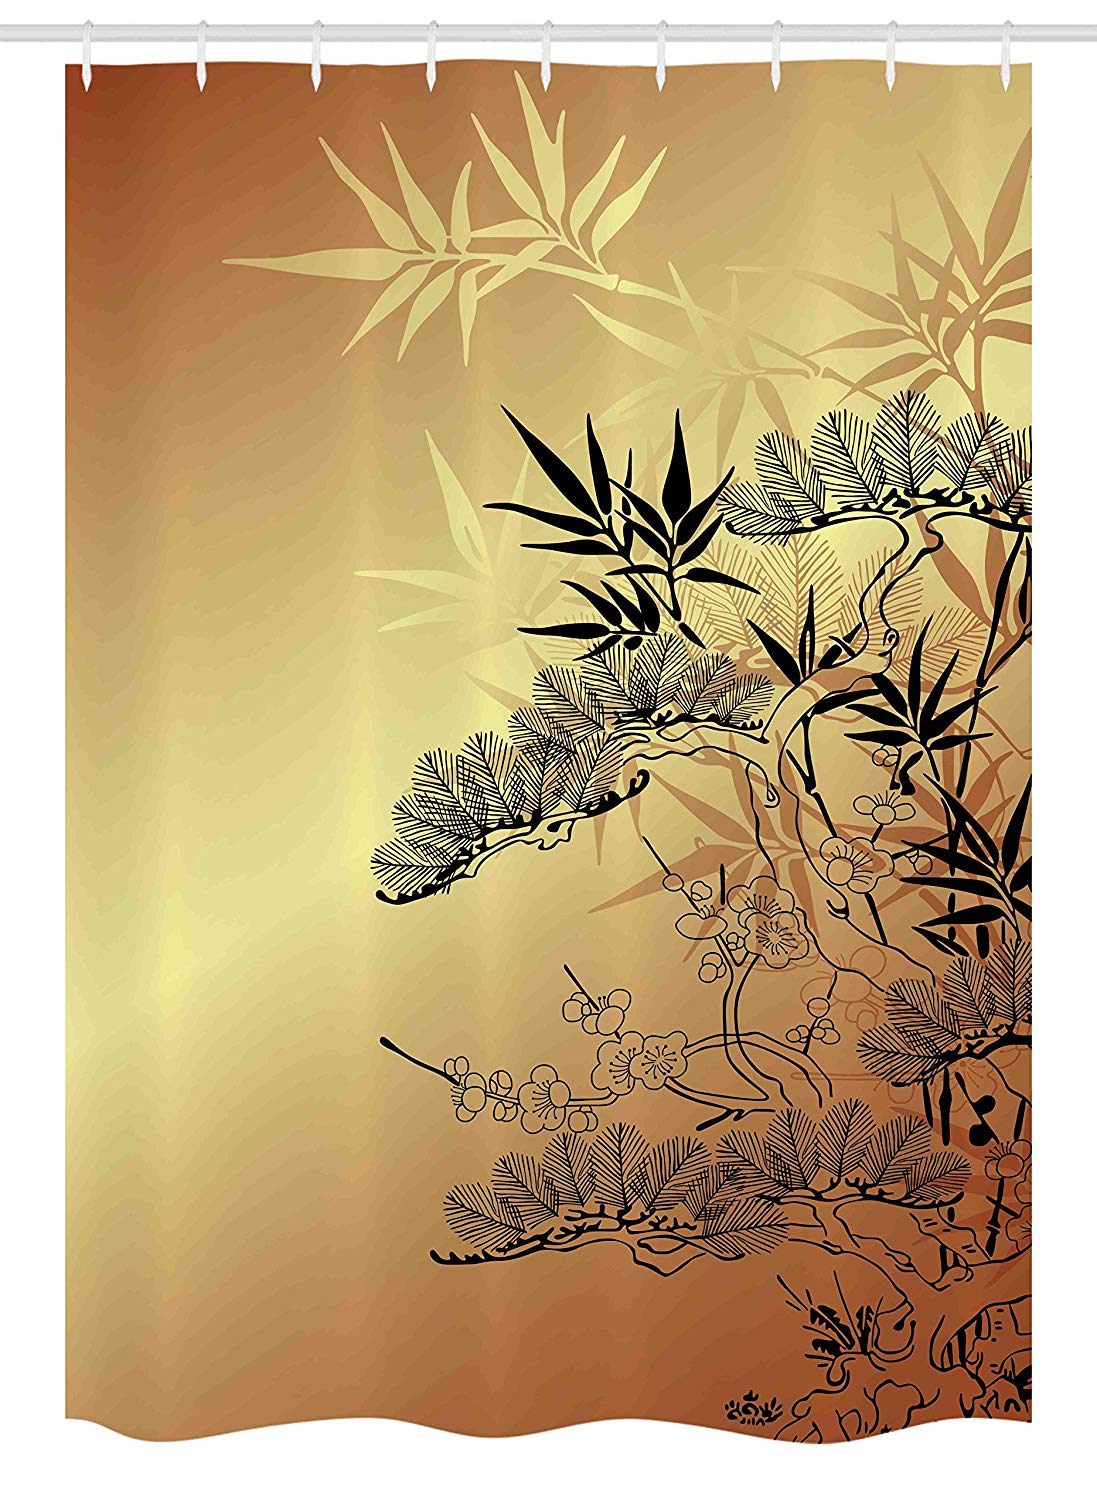 Ambesonne Japanese Stall Shower Curtain, Branches and Bamboo Motifs with Showy Fragrant Leaves Nature Illustration, Fabric Bathroom Decor Set with Hooks, 54" X 78", Sepia Black